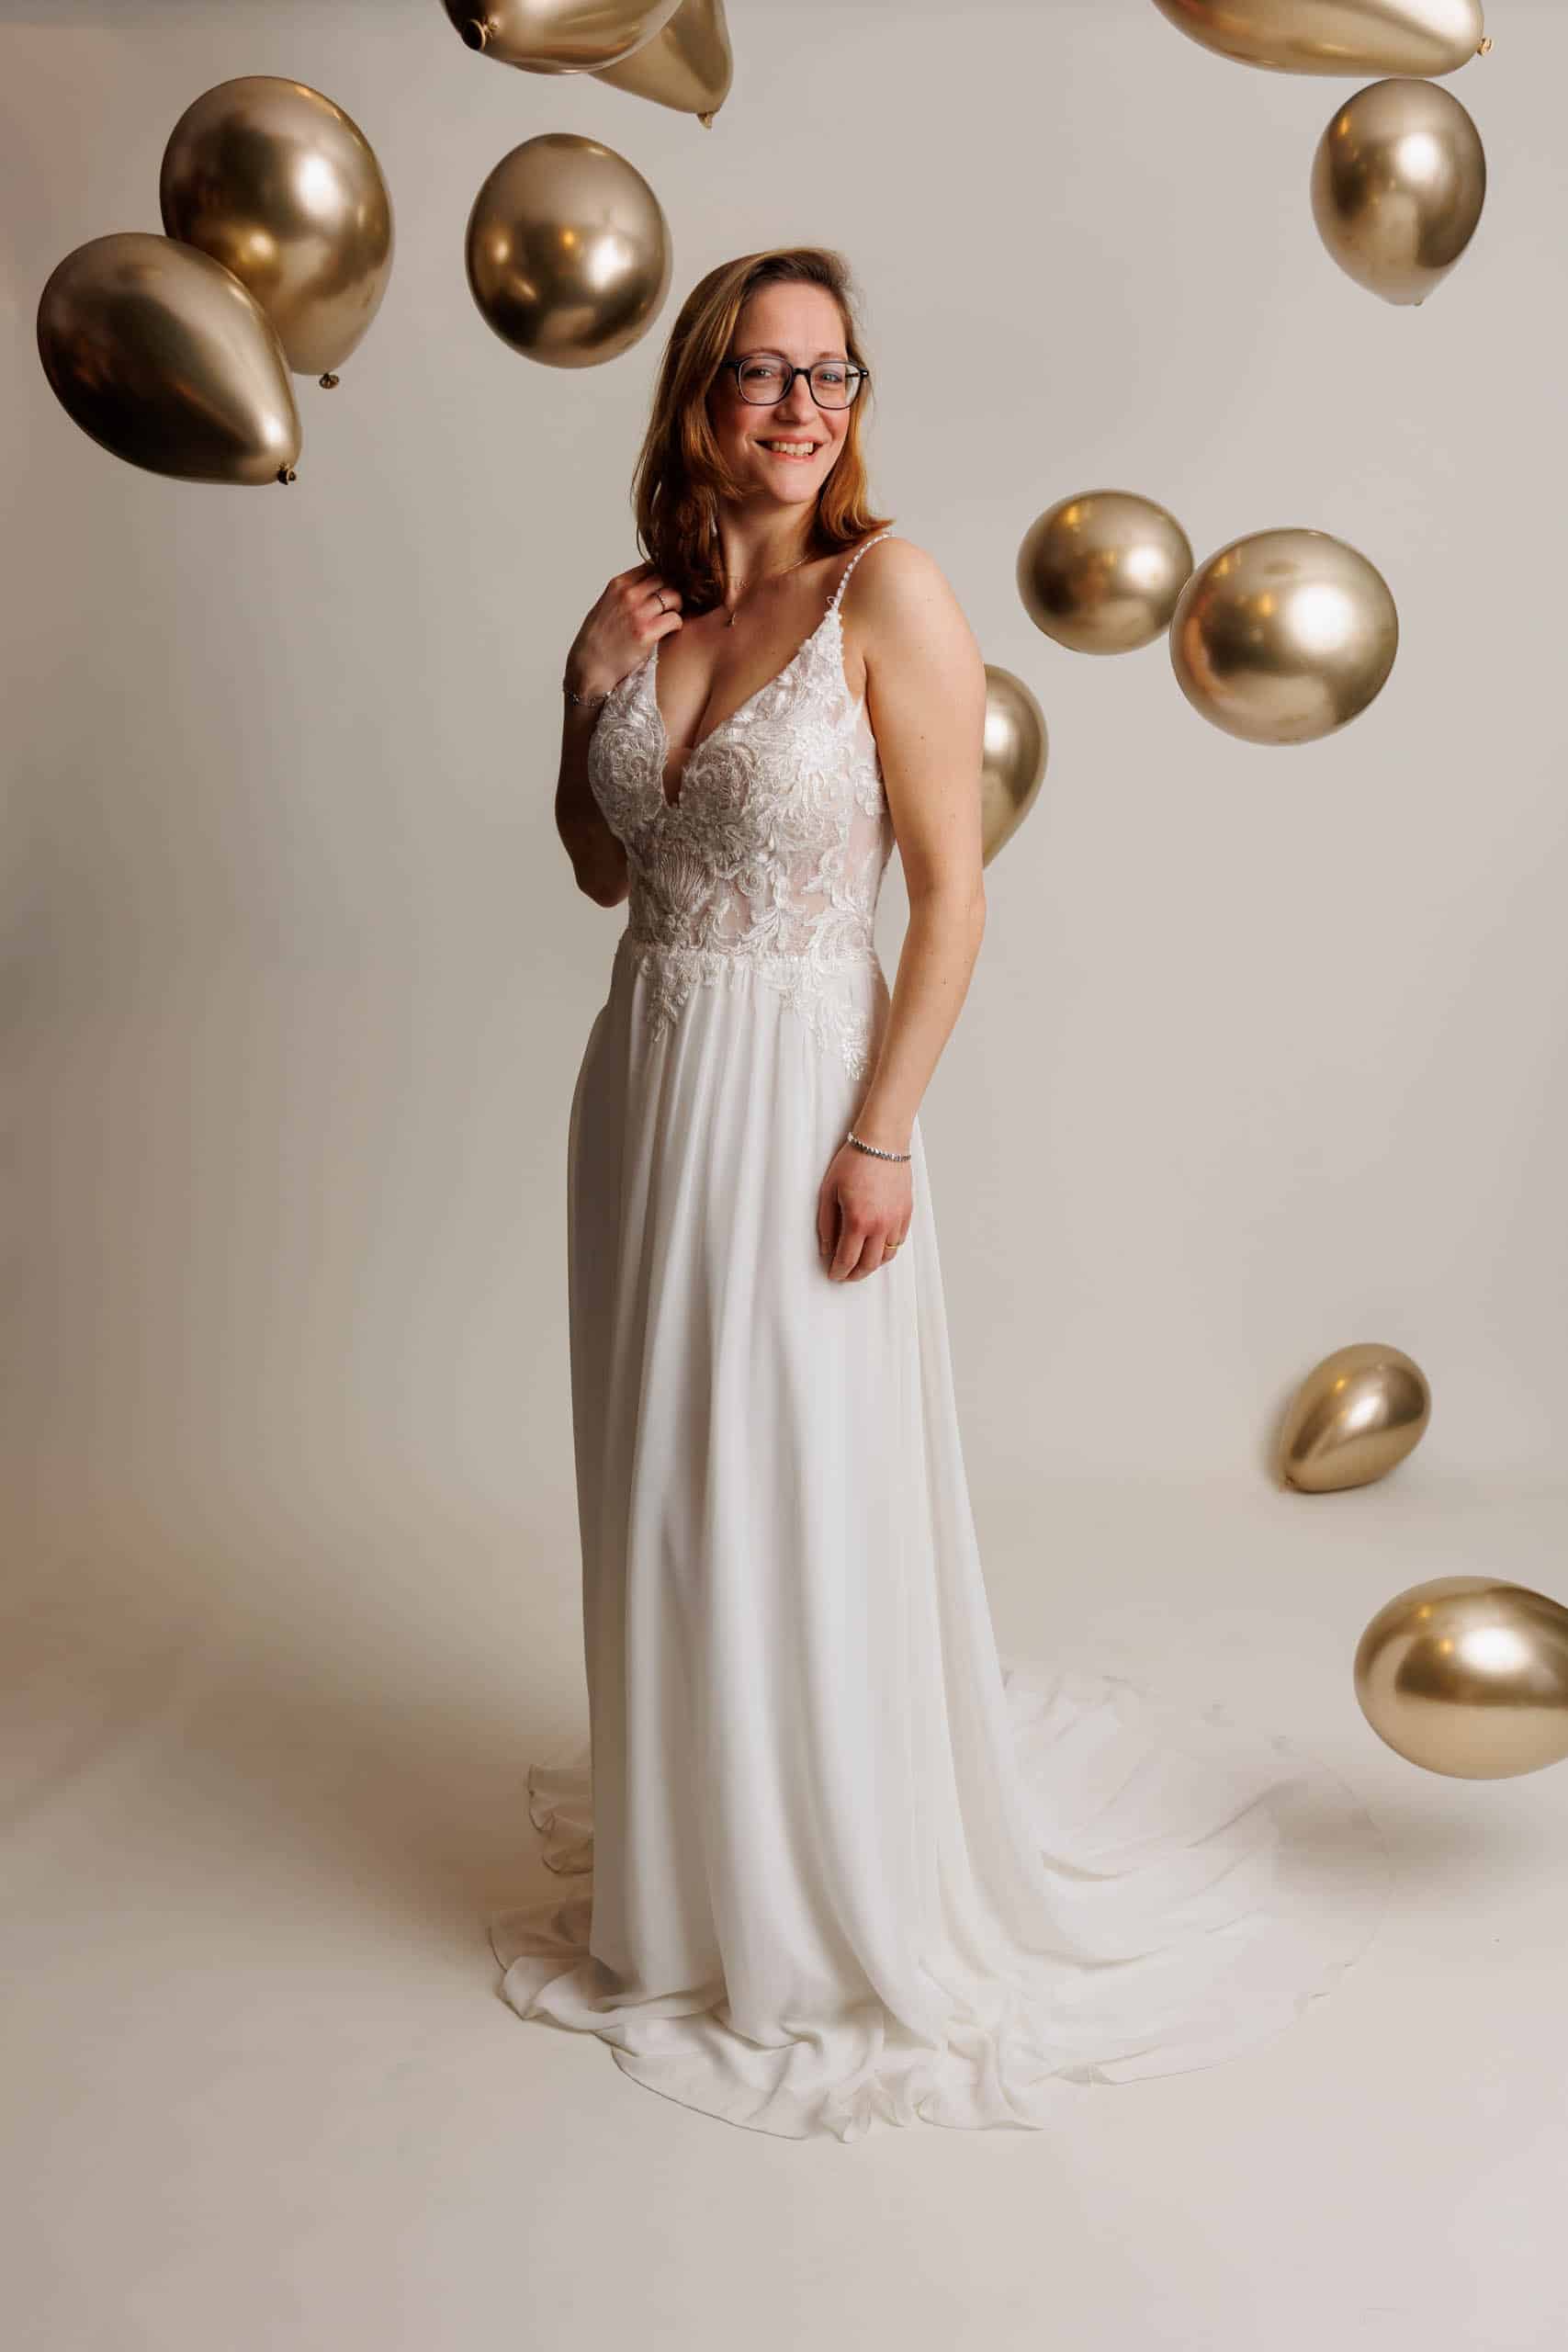 A woman trying on wedding dresses for fun, posing in front of gold balloons.